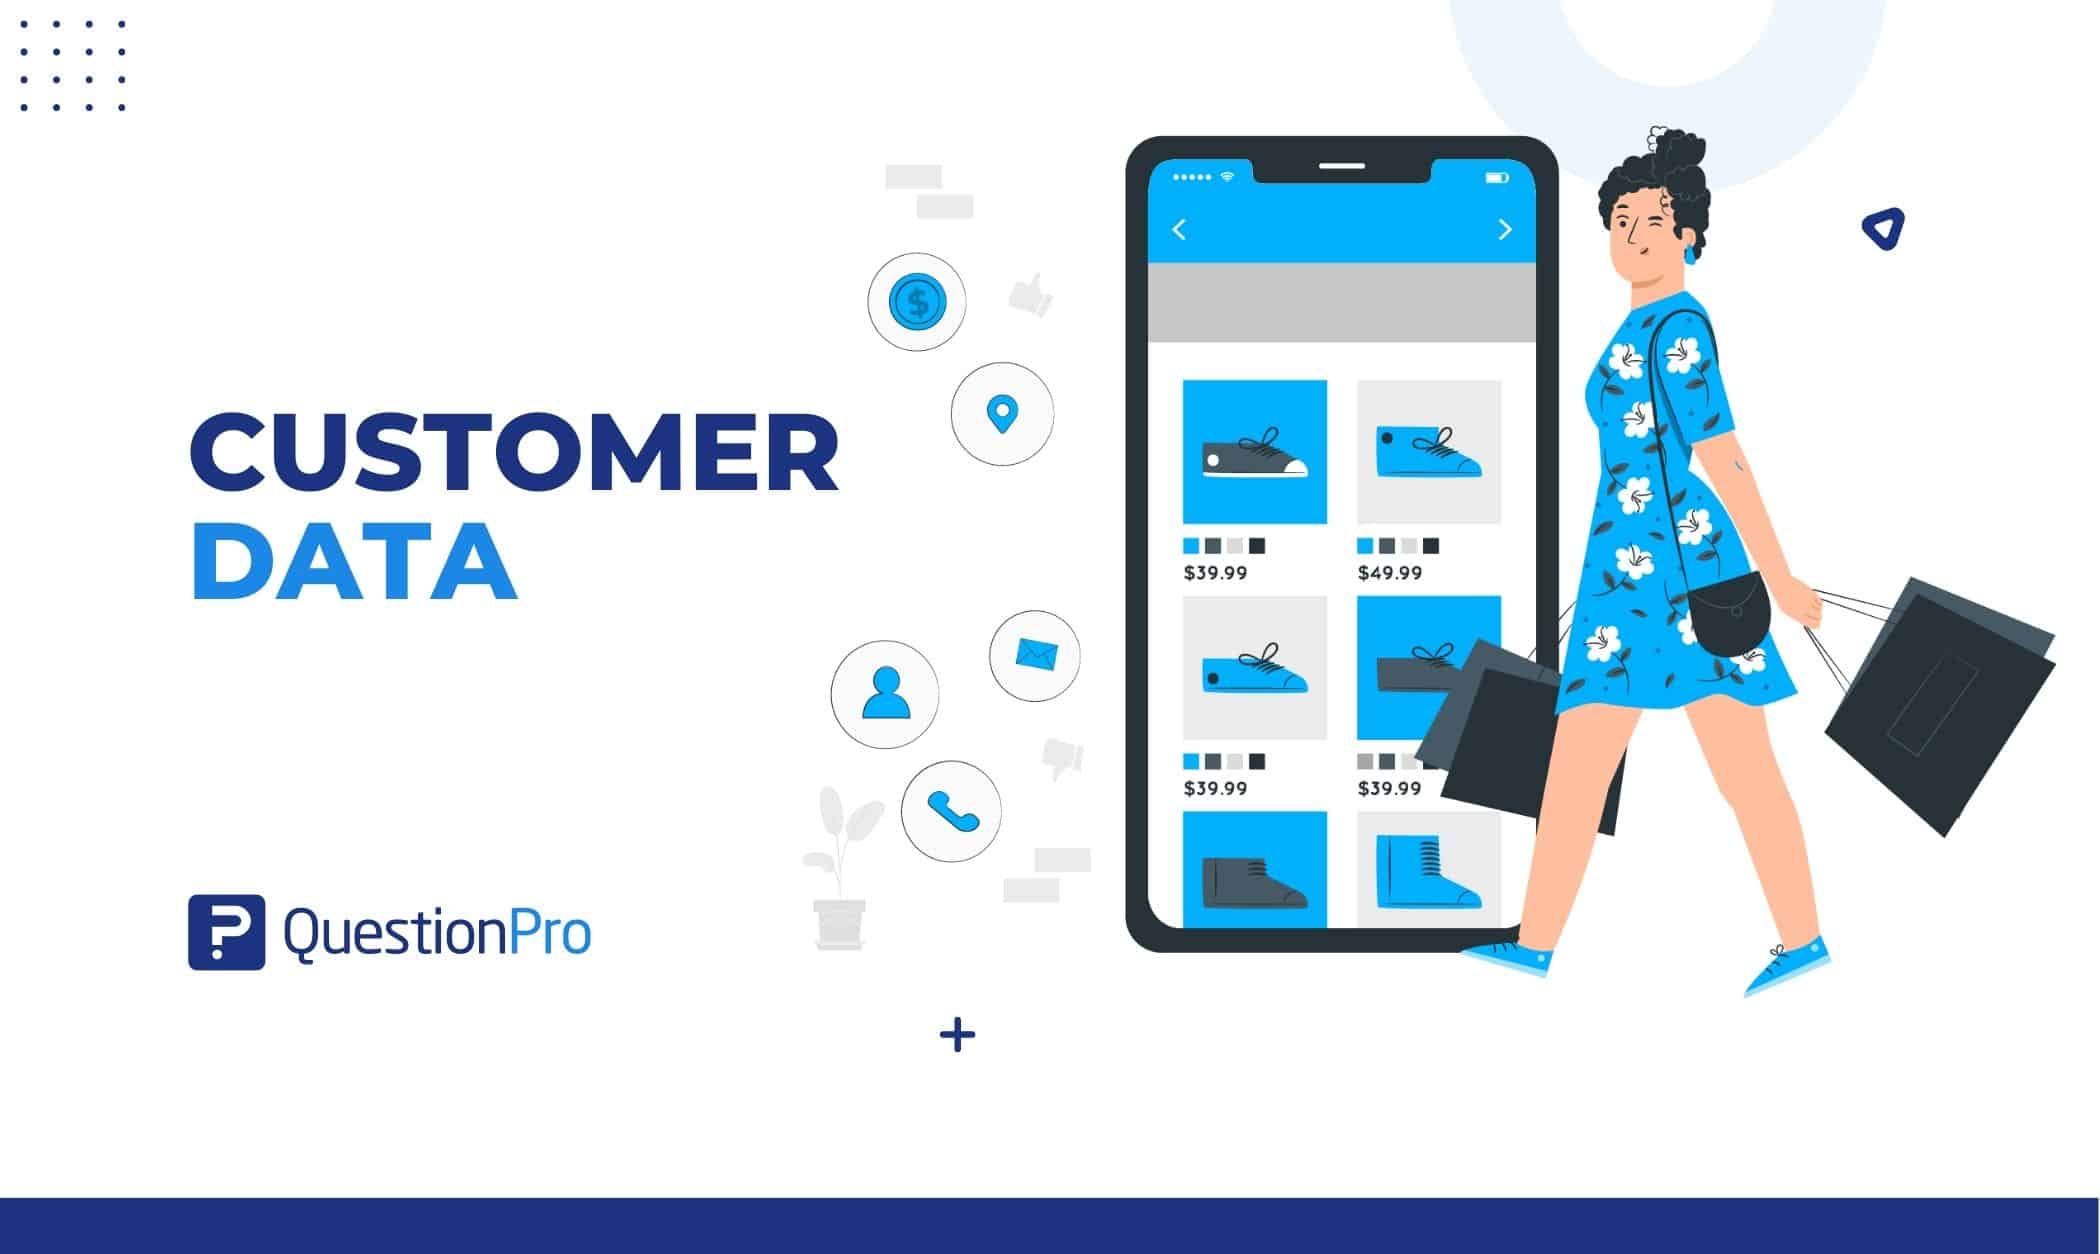 Customer data describes customers' information & how they use your product or service. This data help companies understand their base and cx.